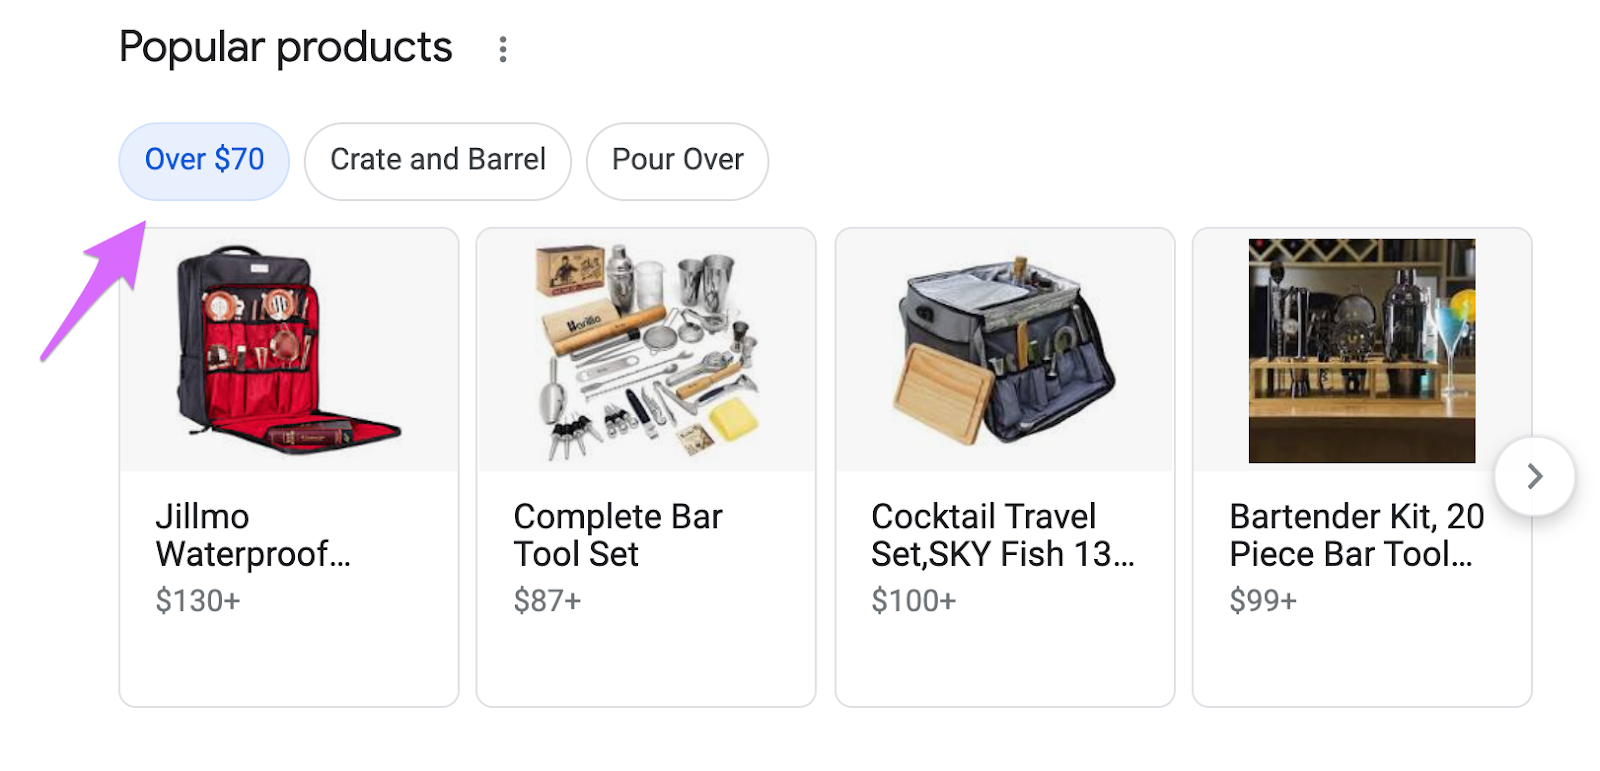 google search carousel results for popular products